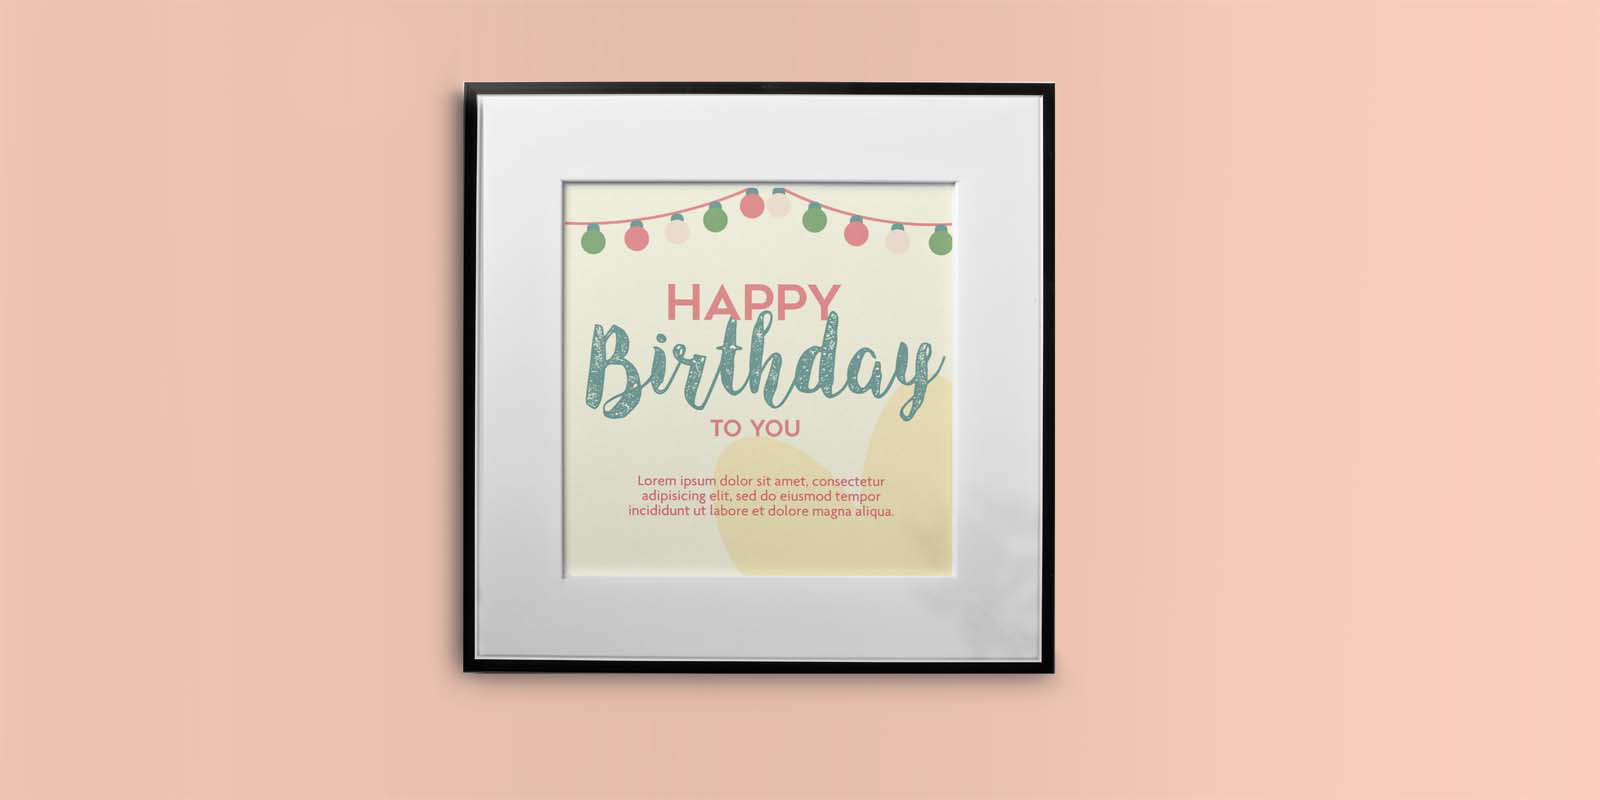 Birthday prints in Perth - Print with Pagerr